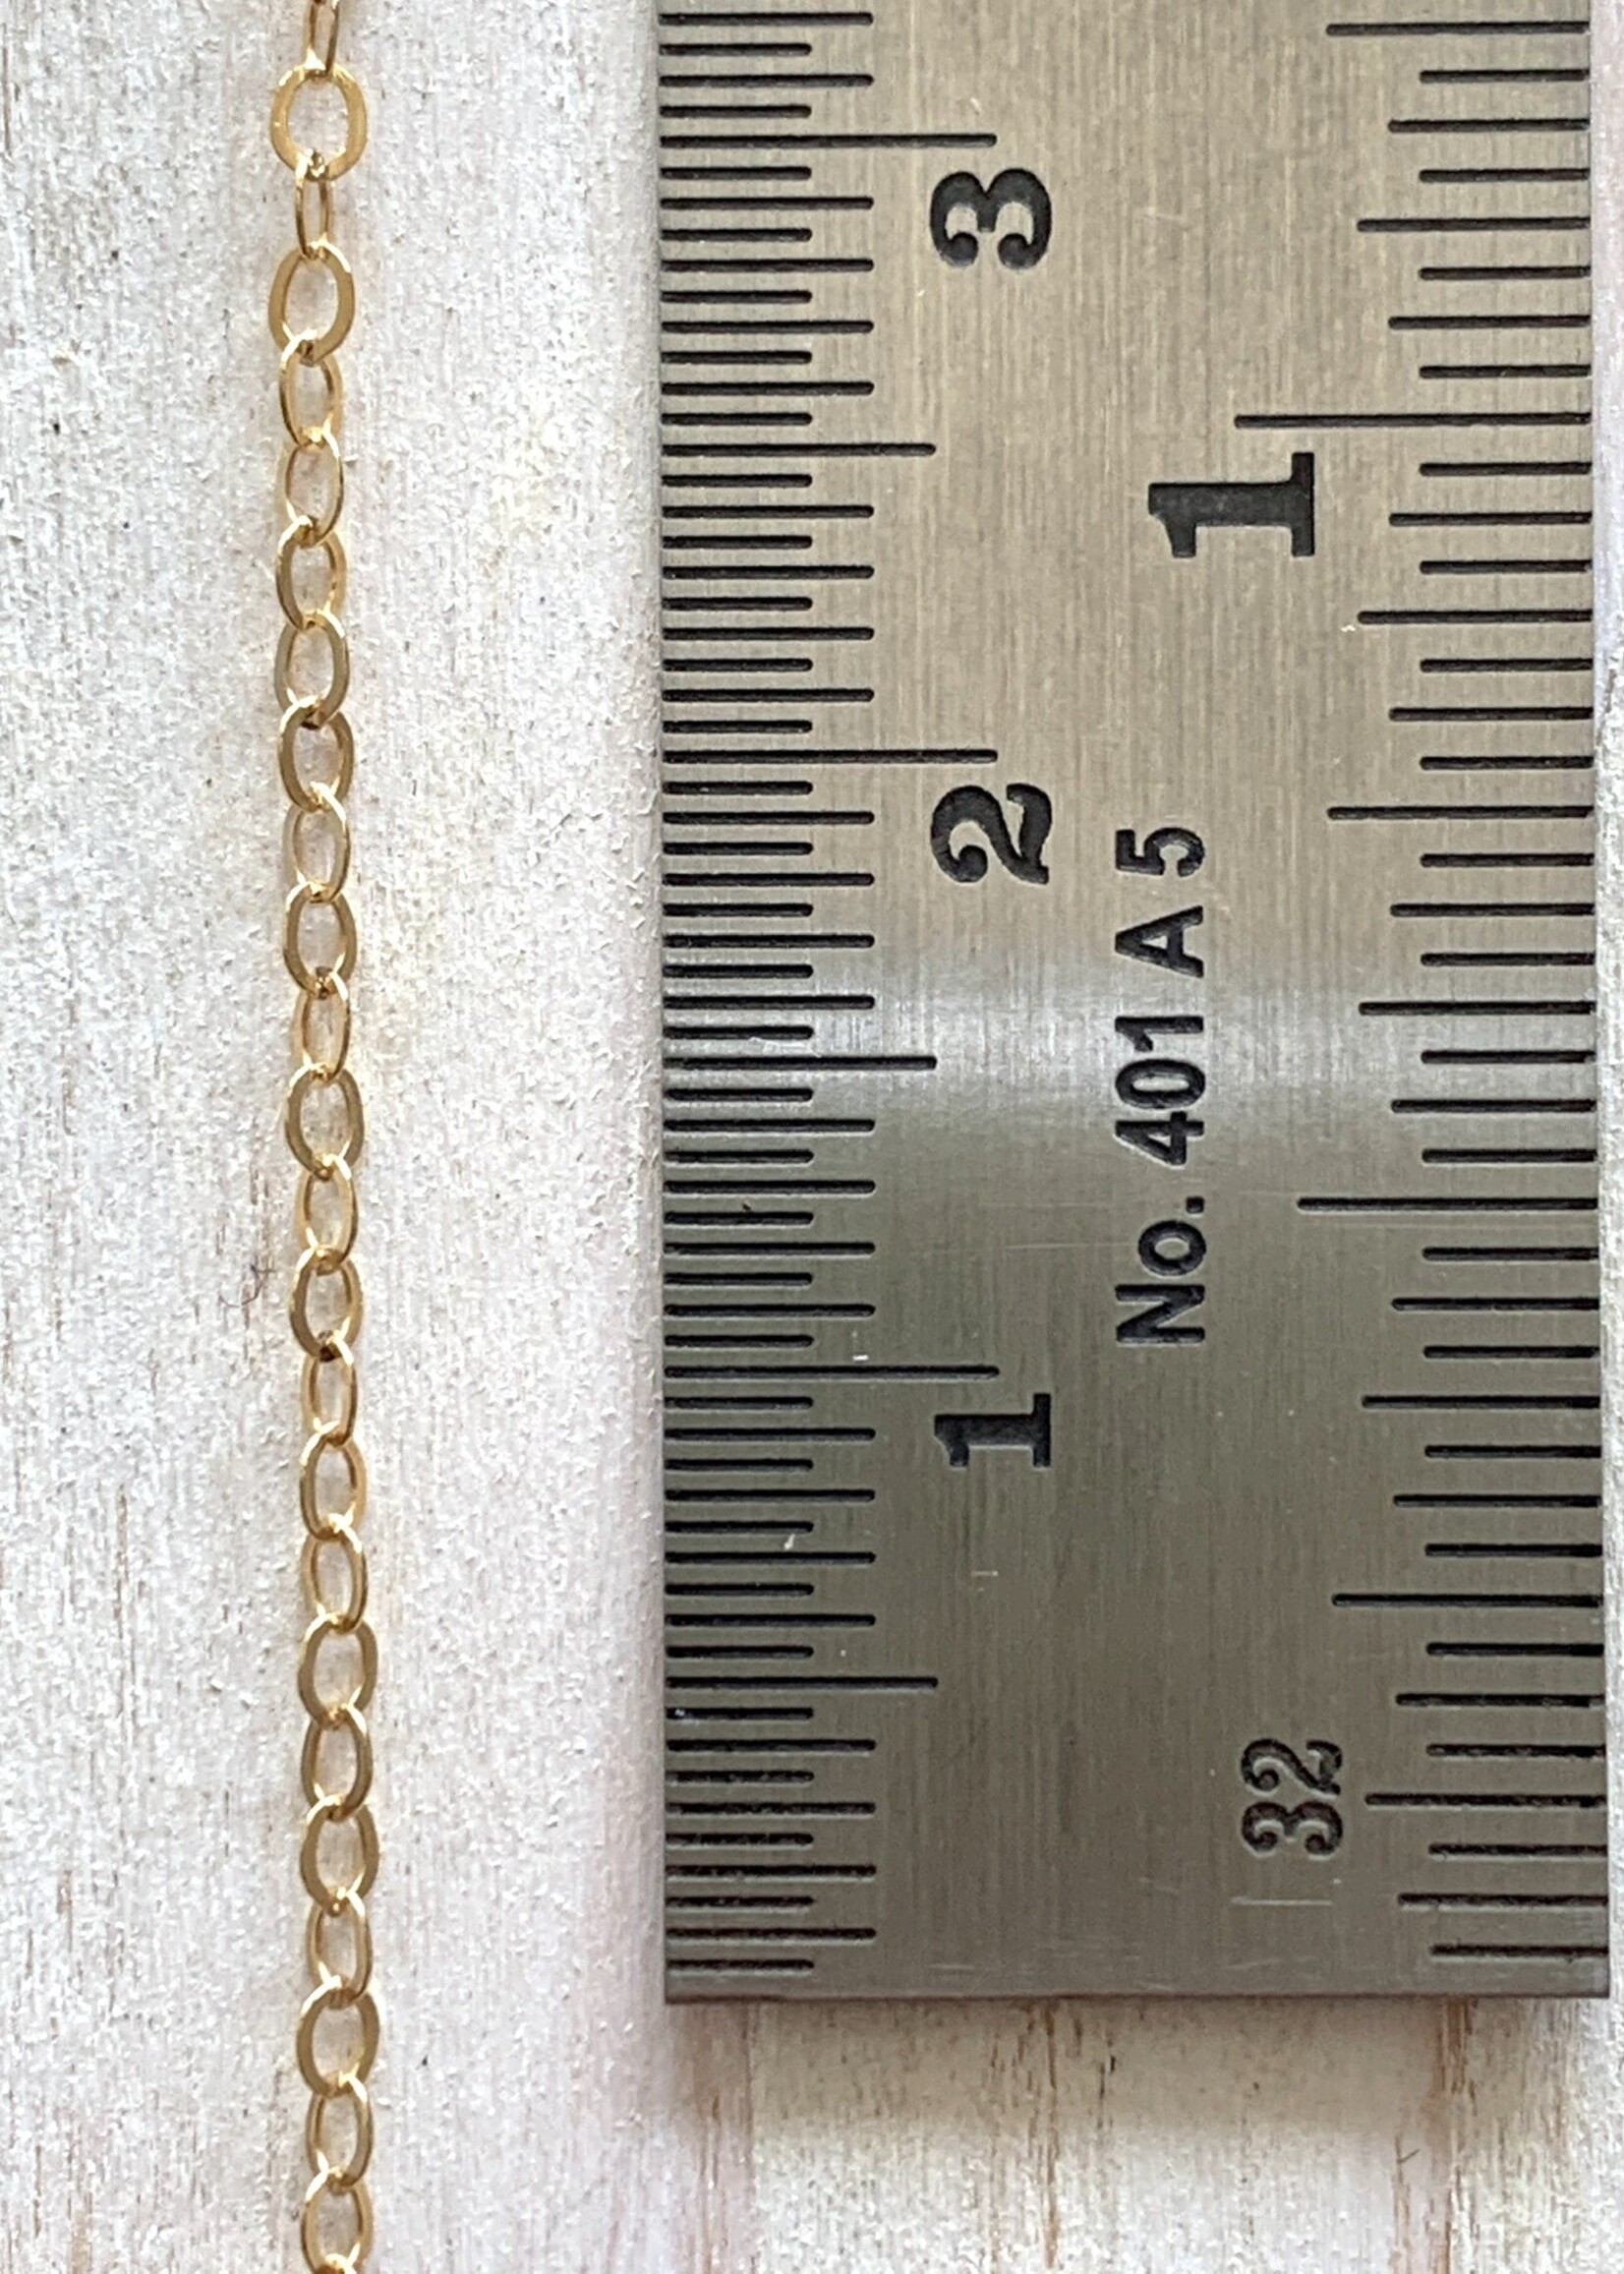 Gold-Filled Cable 3 to 1 Chain by The Foot